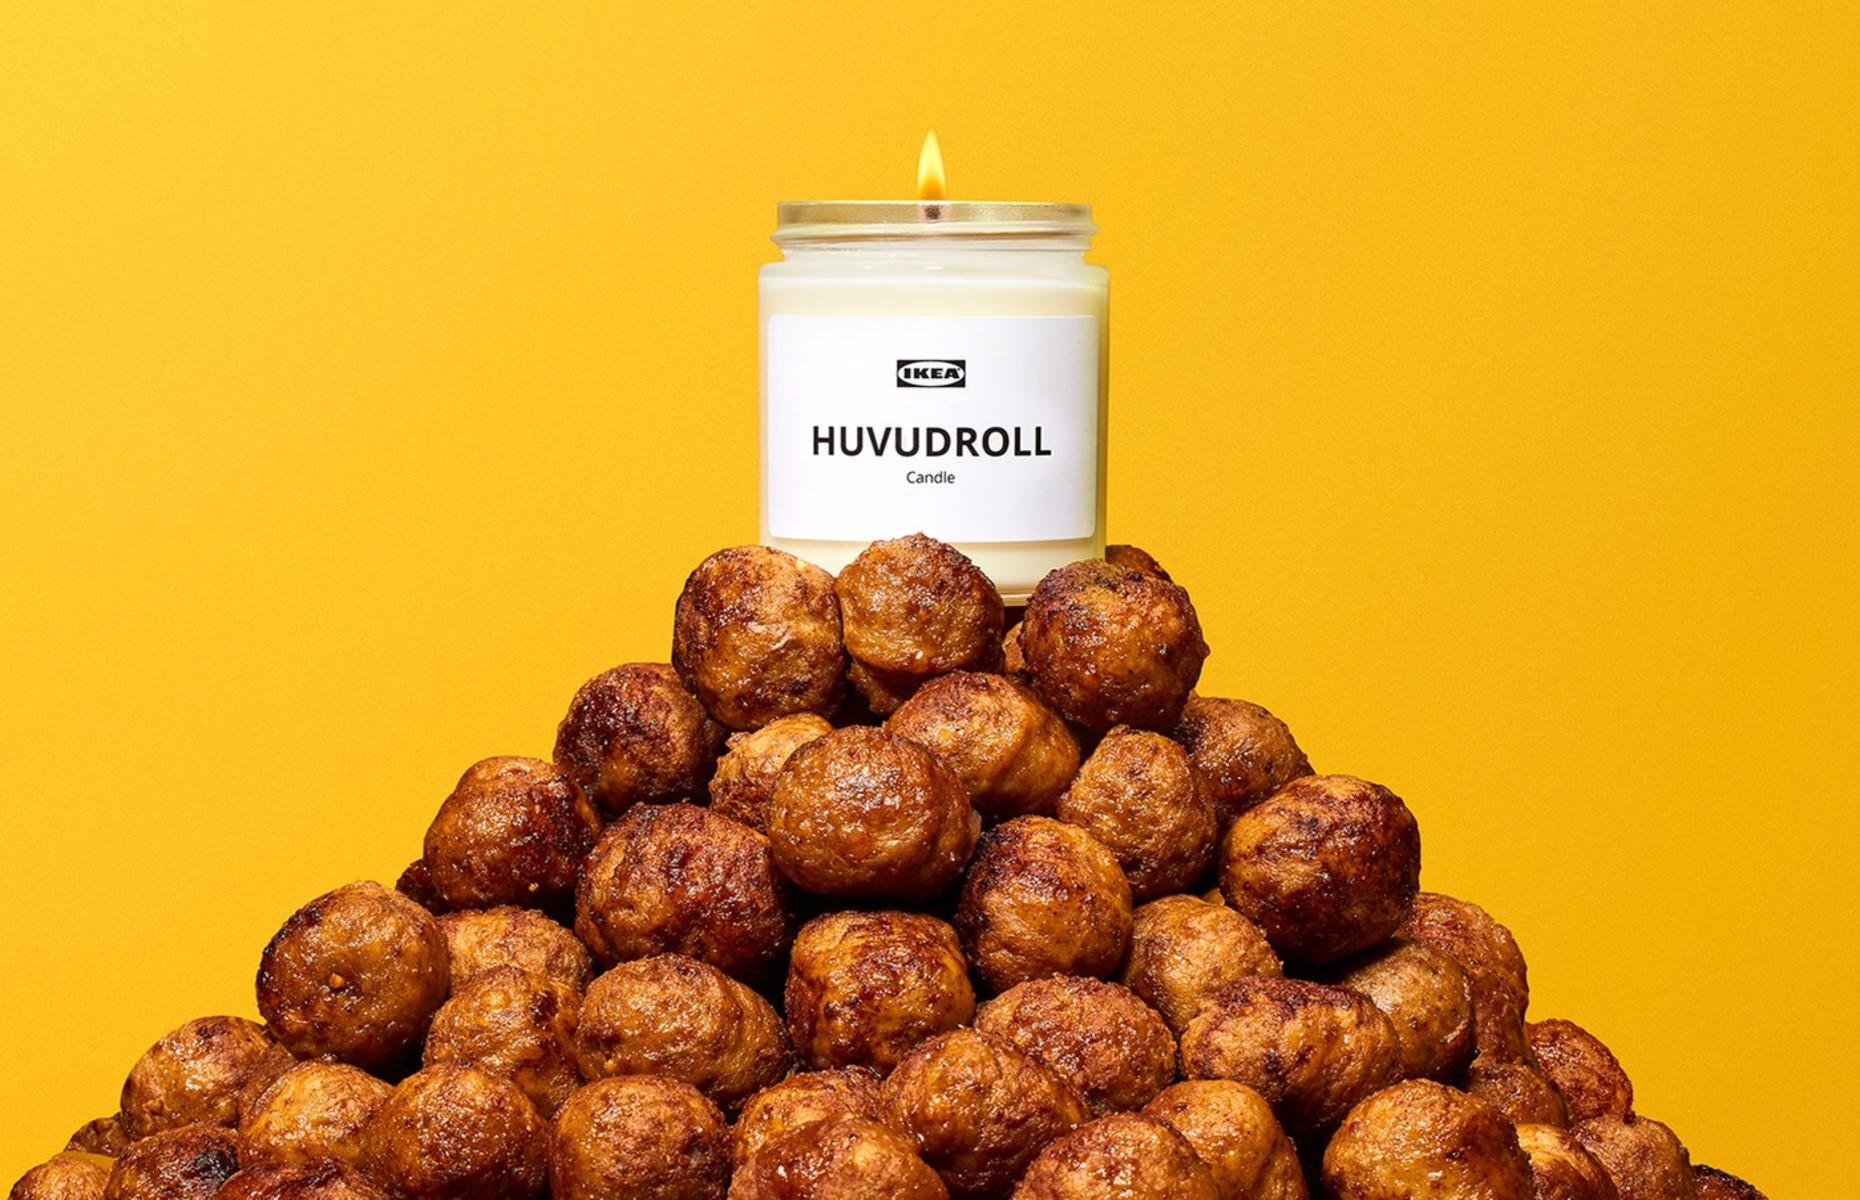 Its new meatball candle